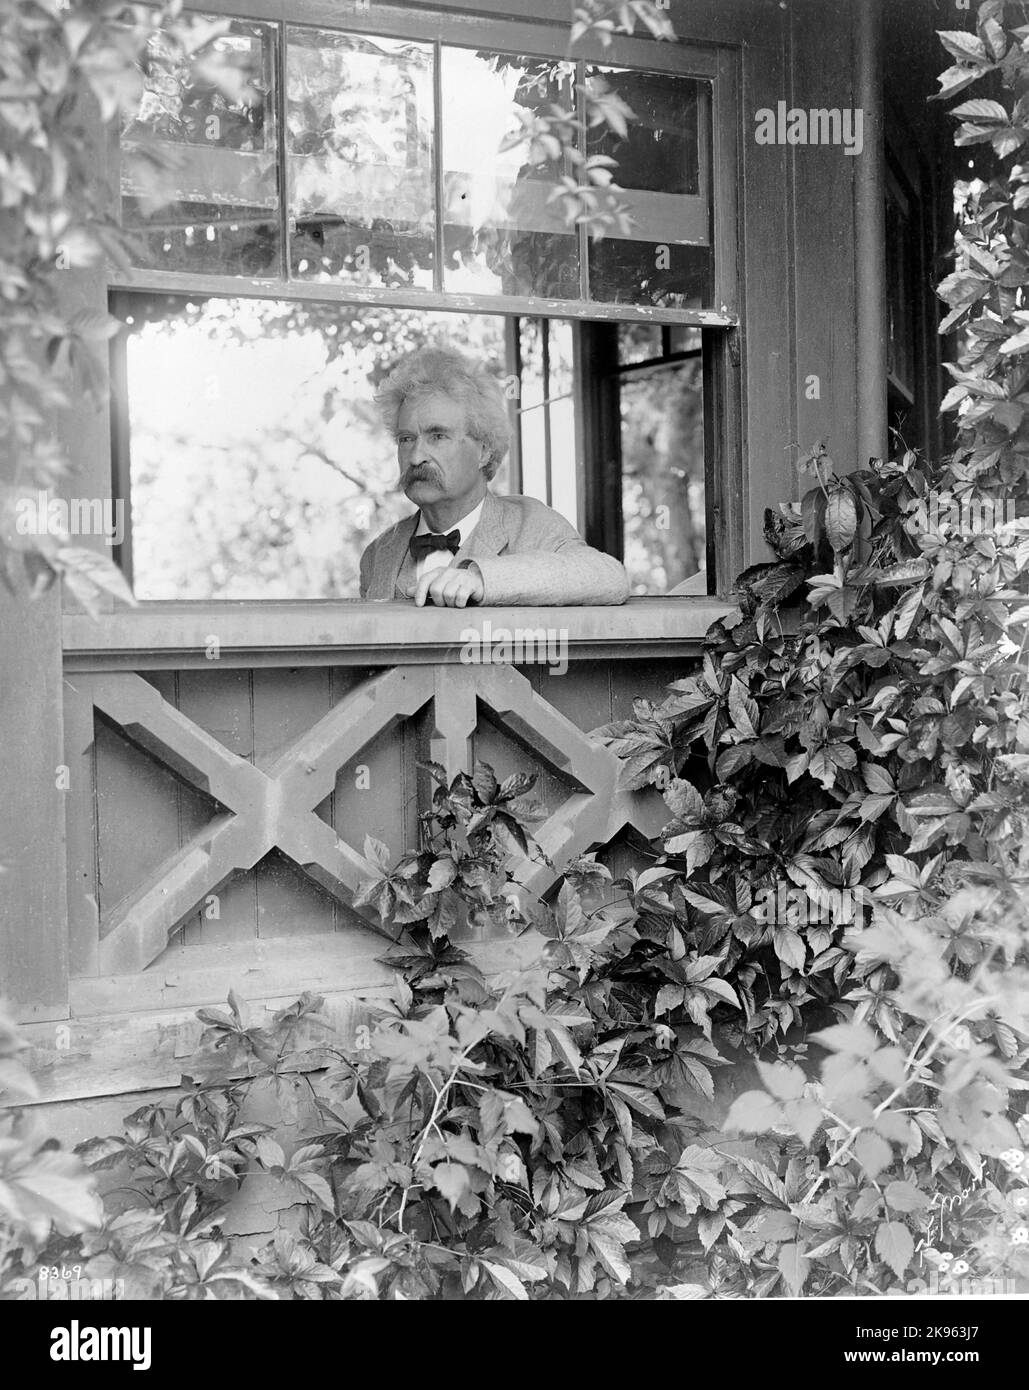 Mark Twaiin (Clemens, Samuel Langhorne ) - american writer - ( 1835-1910) in 1903 by T.E. Morr. Mark Twain, head-and-shoulders portrait, facing left, looking out window Stock Photo